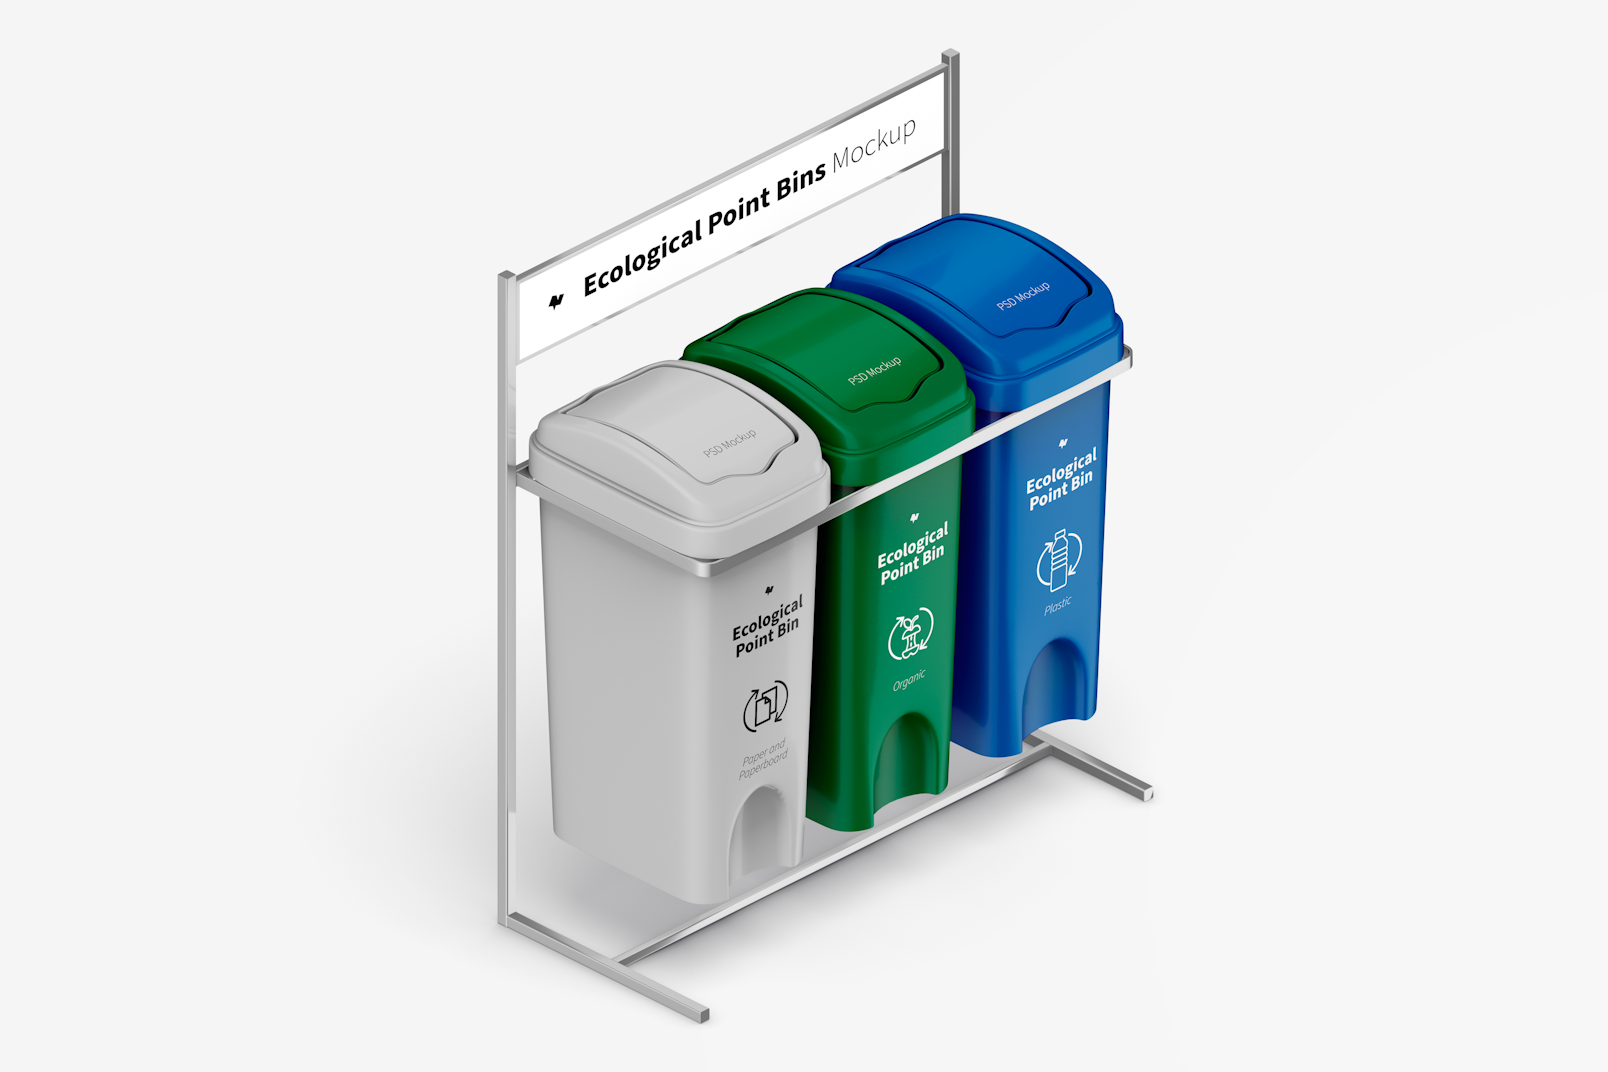 Ecological Point Bins Mockup, Isometric View